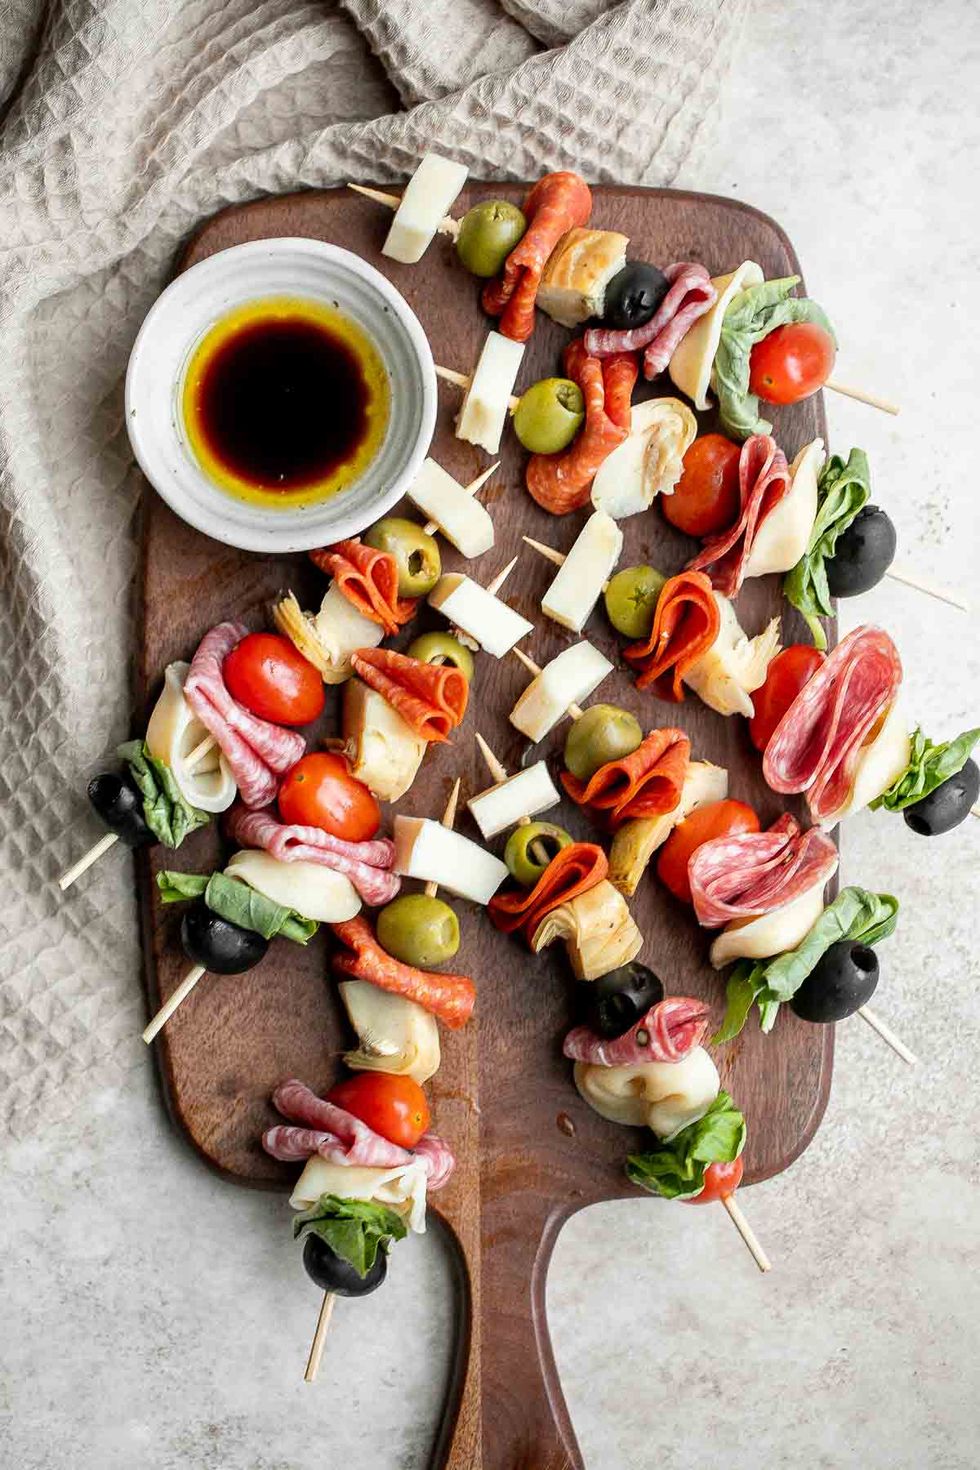 How to Build a Dinner-Worthy Charcuterie Board - Snixy Kitchen